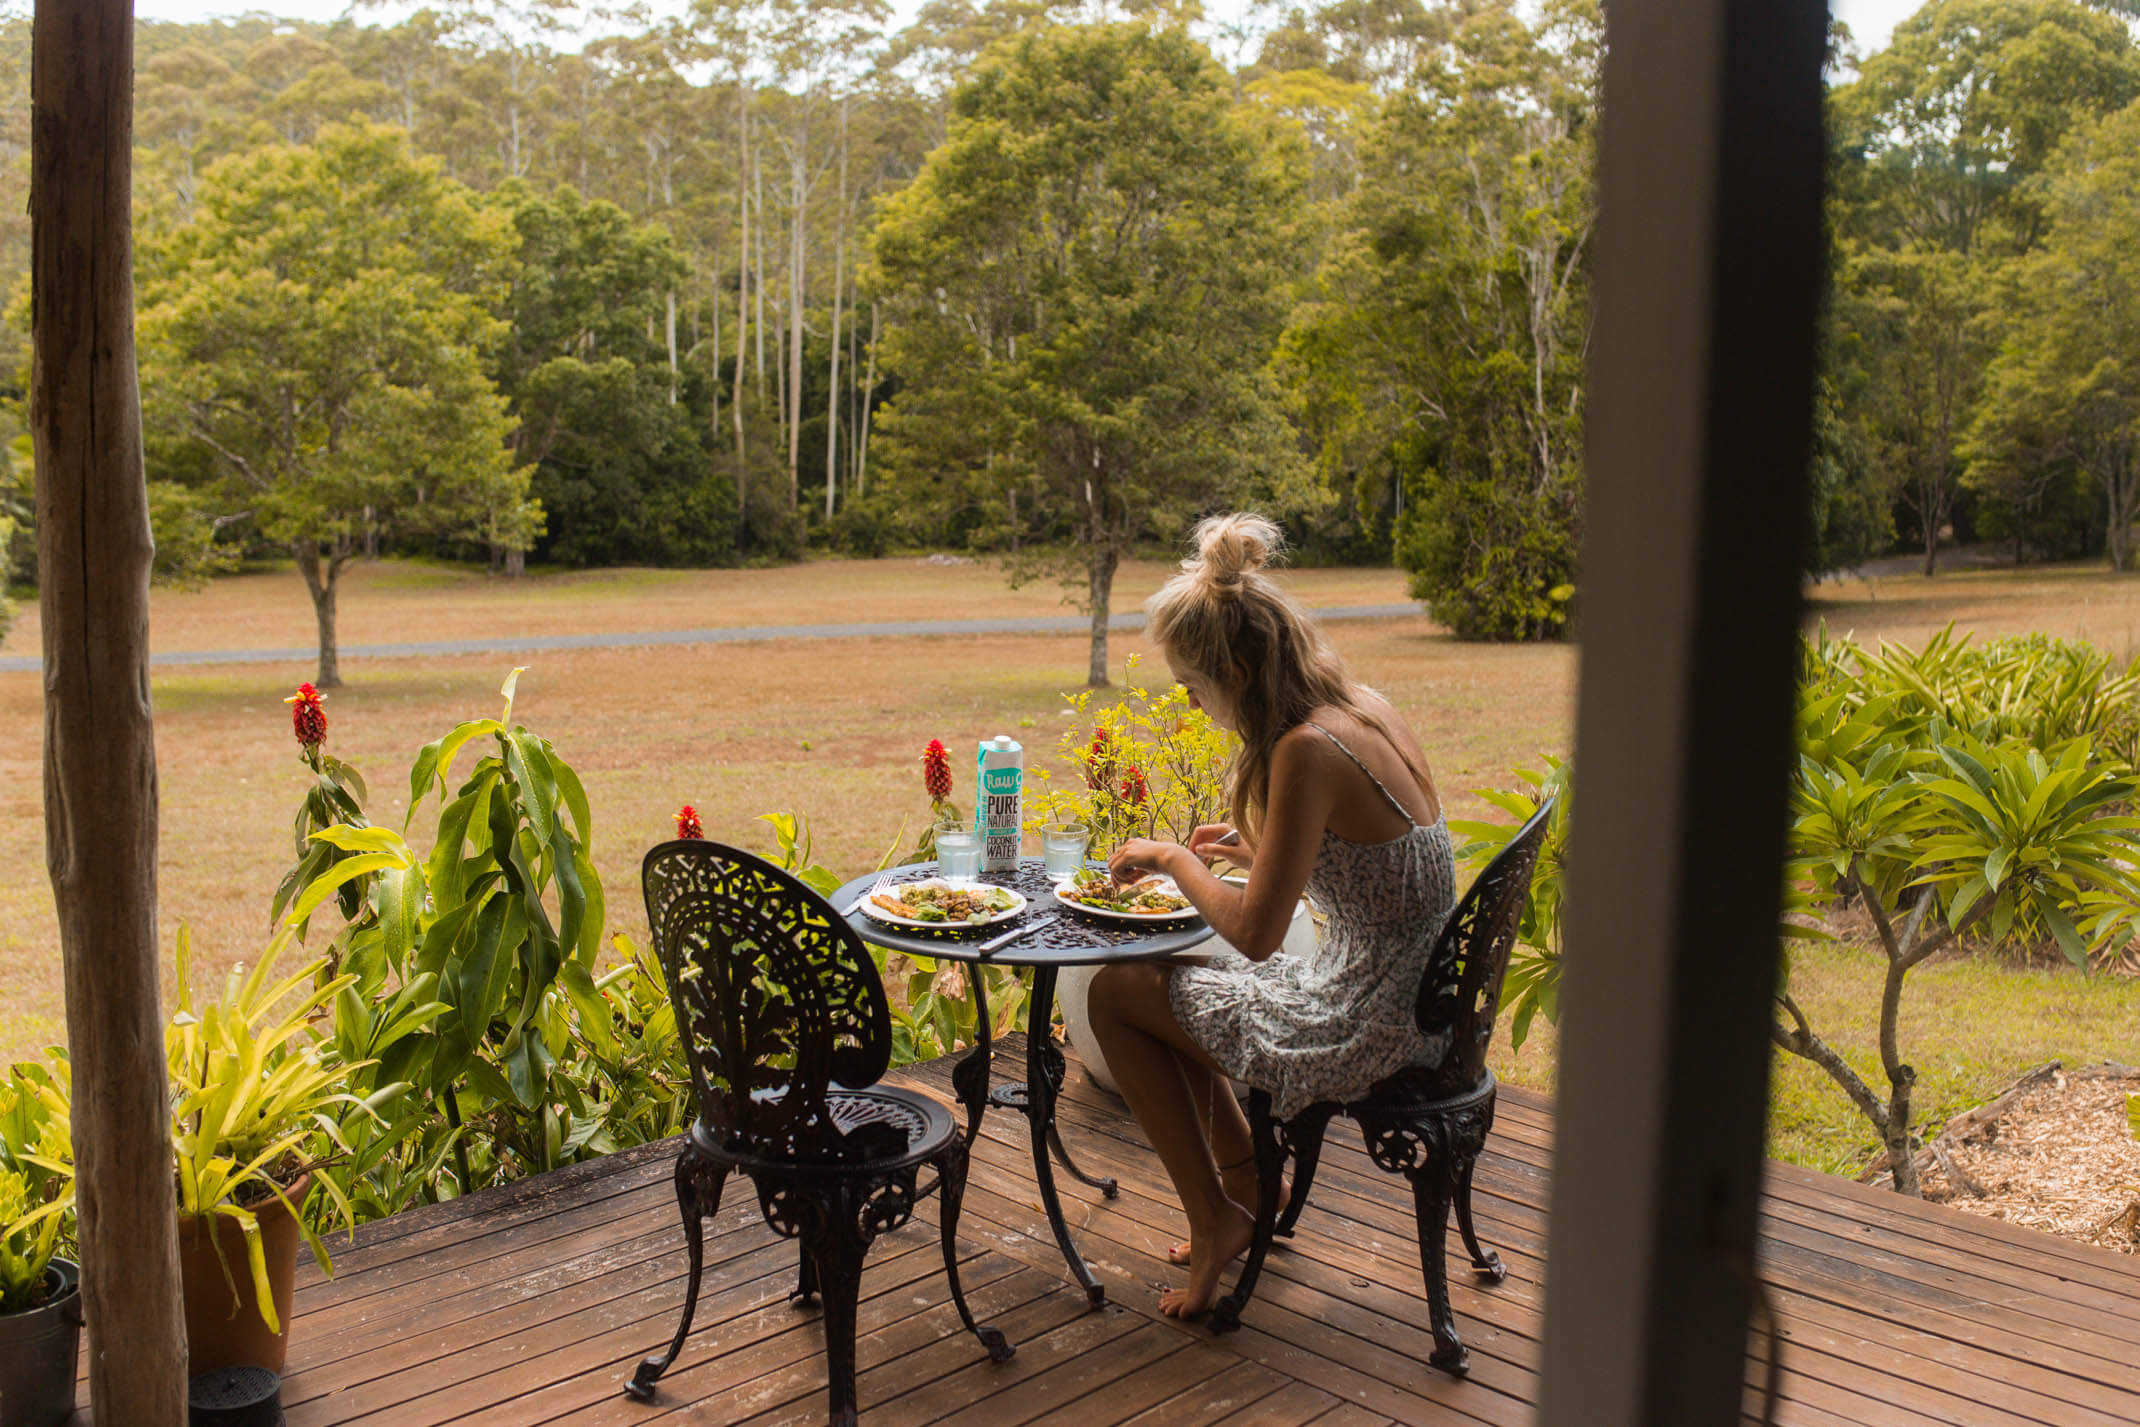 Our 3 day DIY retreat in the Hinterland of Byron Bay